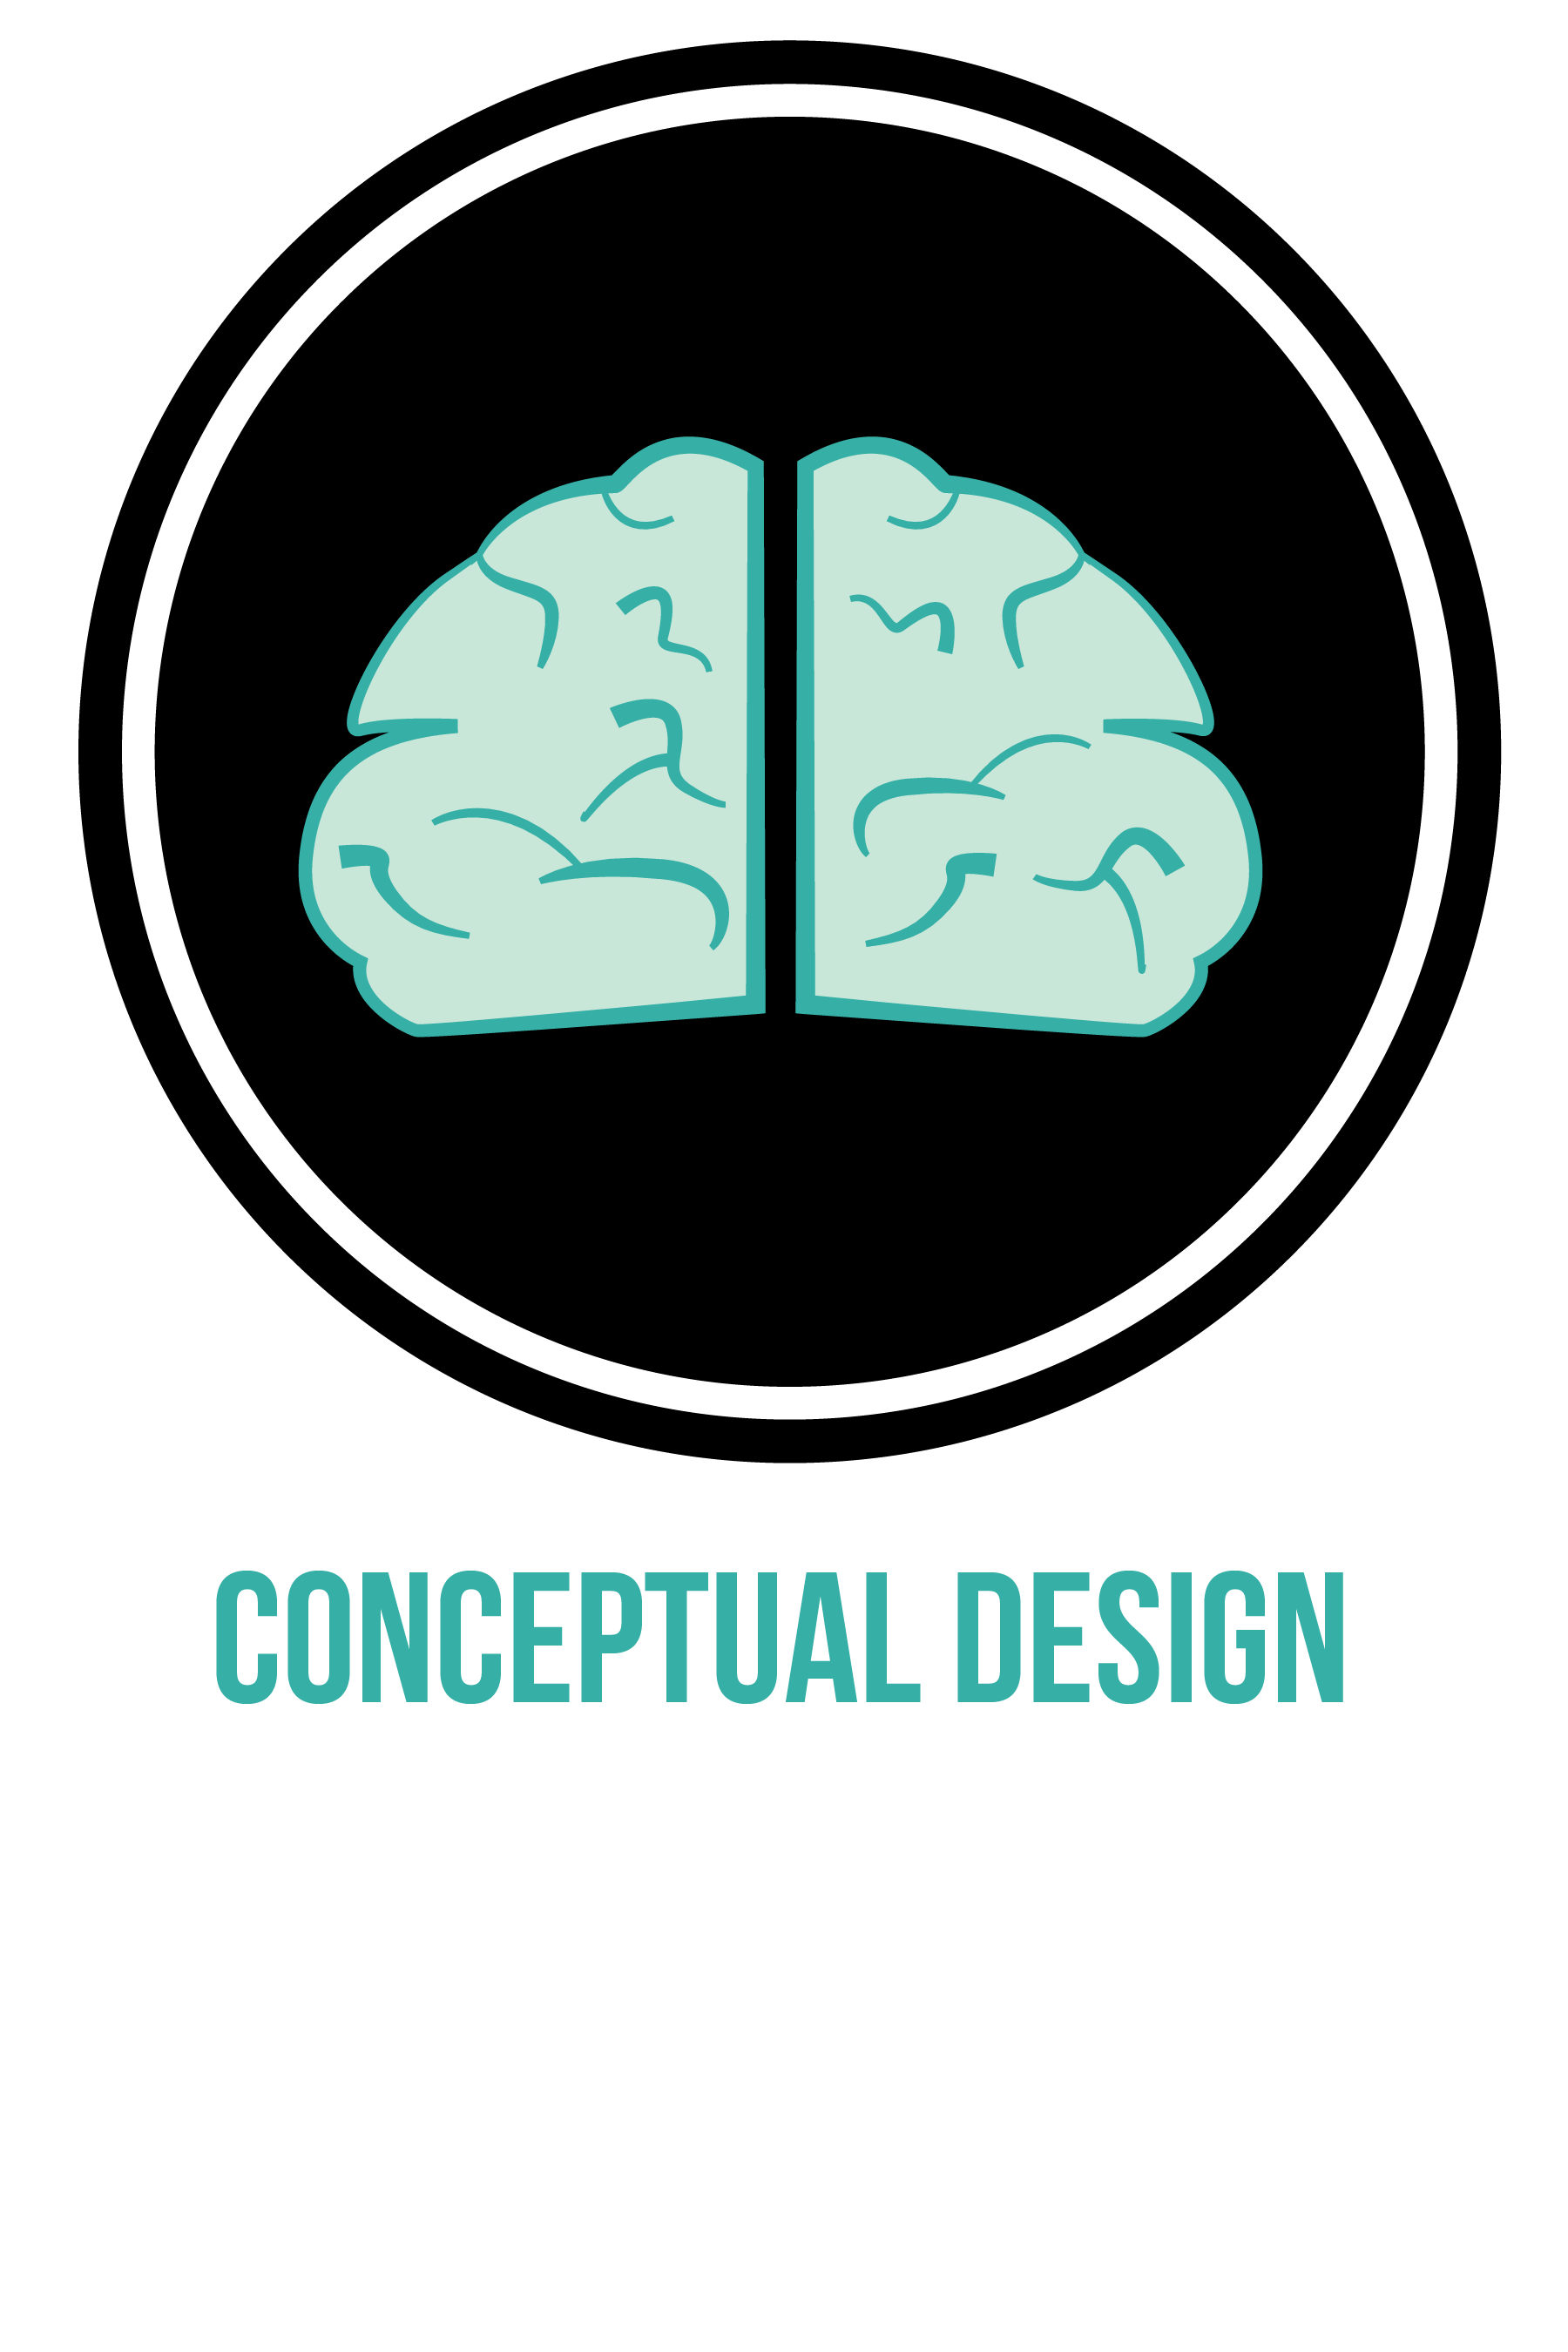  Need a design with some meaning and thought behind it? &nbsp;Conceptual design, especially that based around environmental issues, is my specialty. &nbsp;With a unique style, combining my love for imperfect drawings and digital art, I can create ima